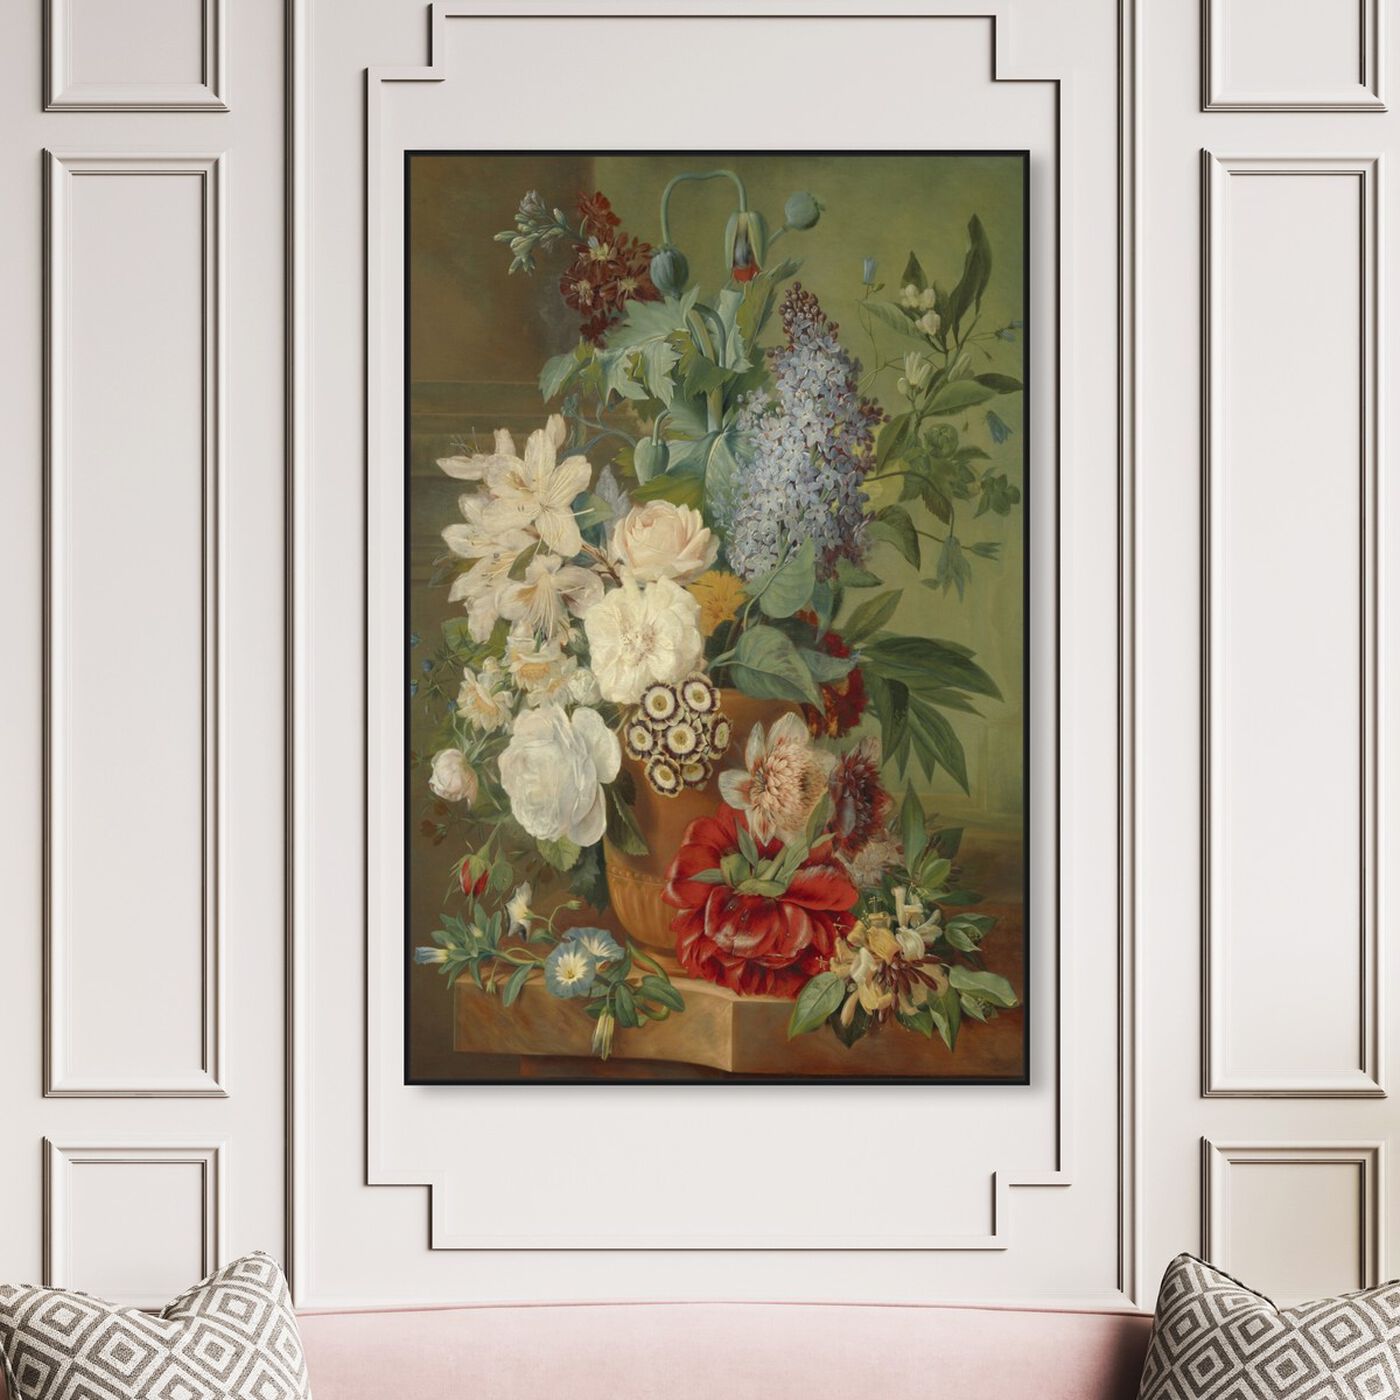 Hanging view of Flower Arrangement VIII - The Art Cabinet featuring classic and figurative and french décor art.